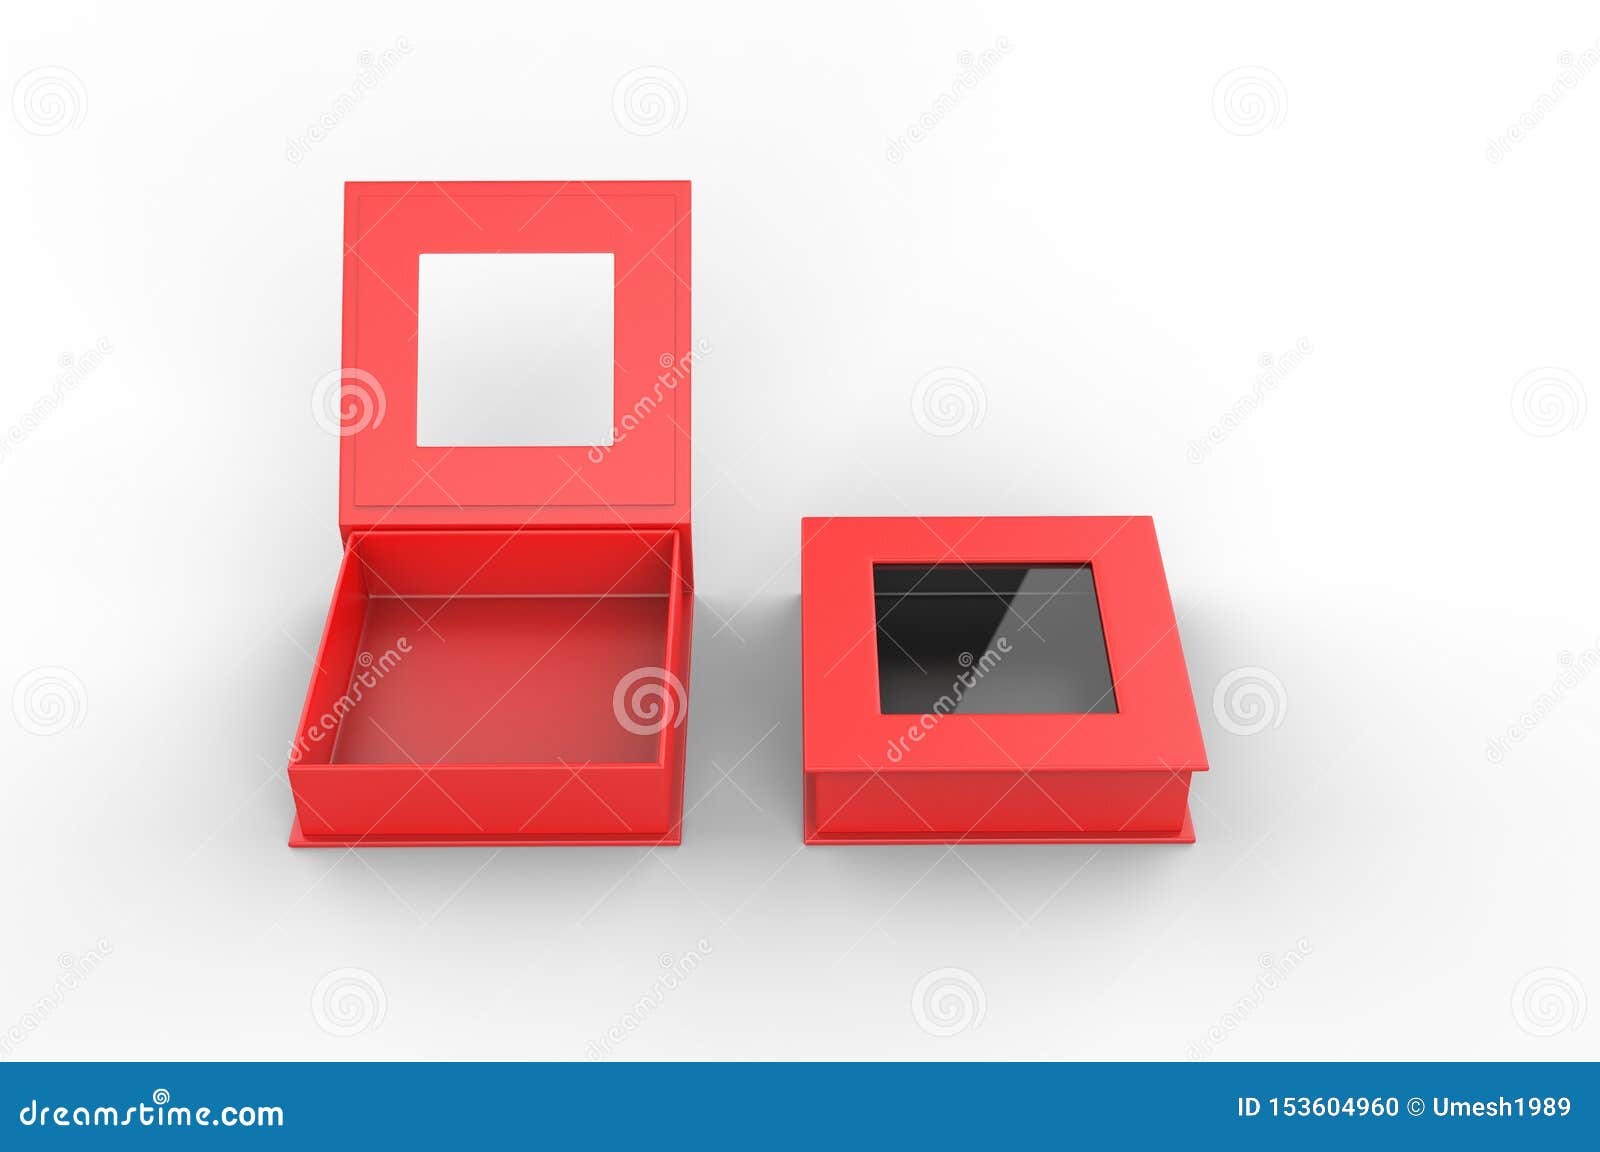 Download White Blank Square Hard Window Box For Branding Mock Up ...